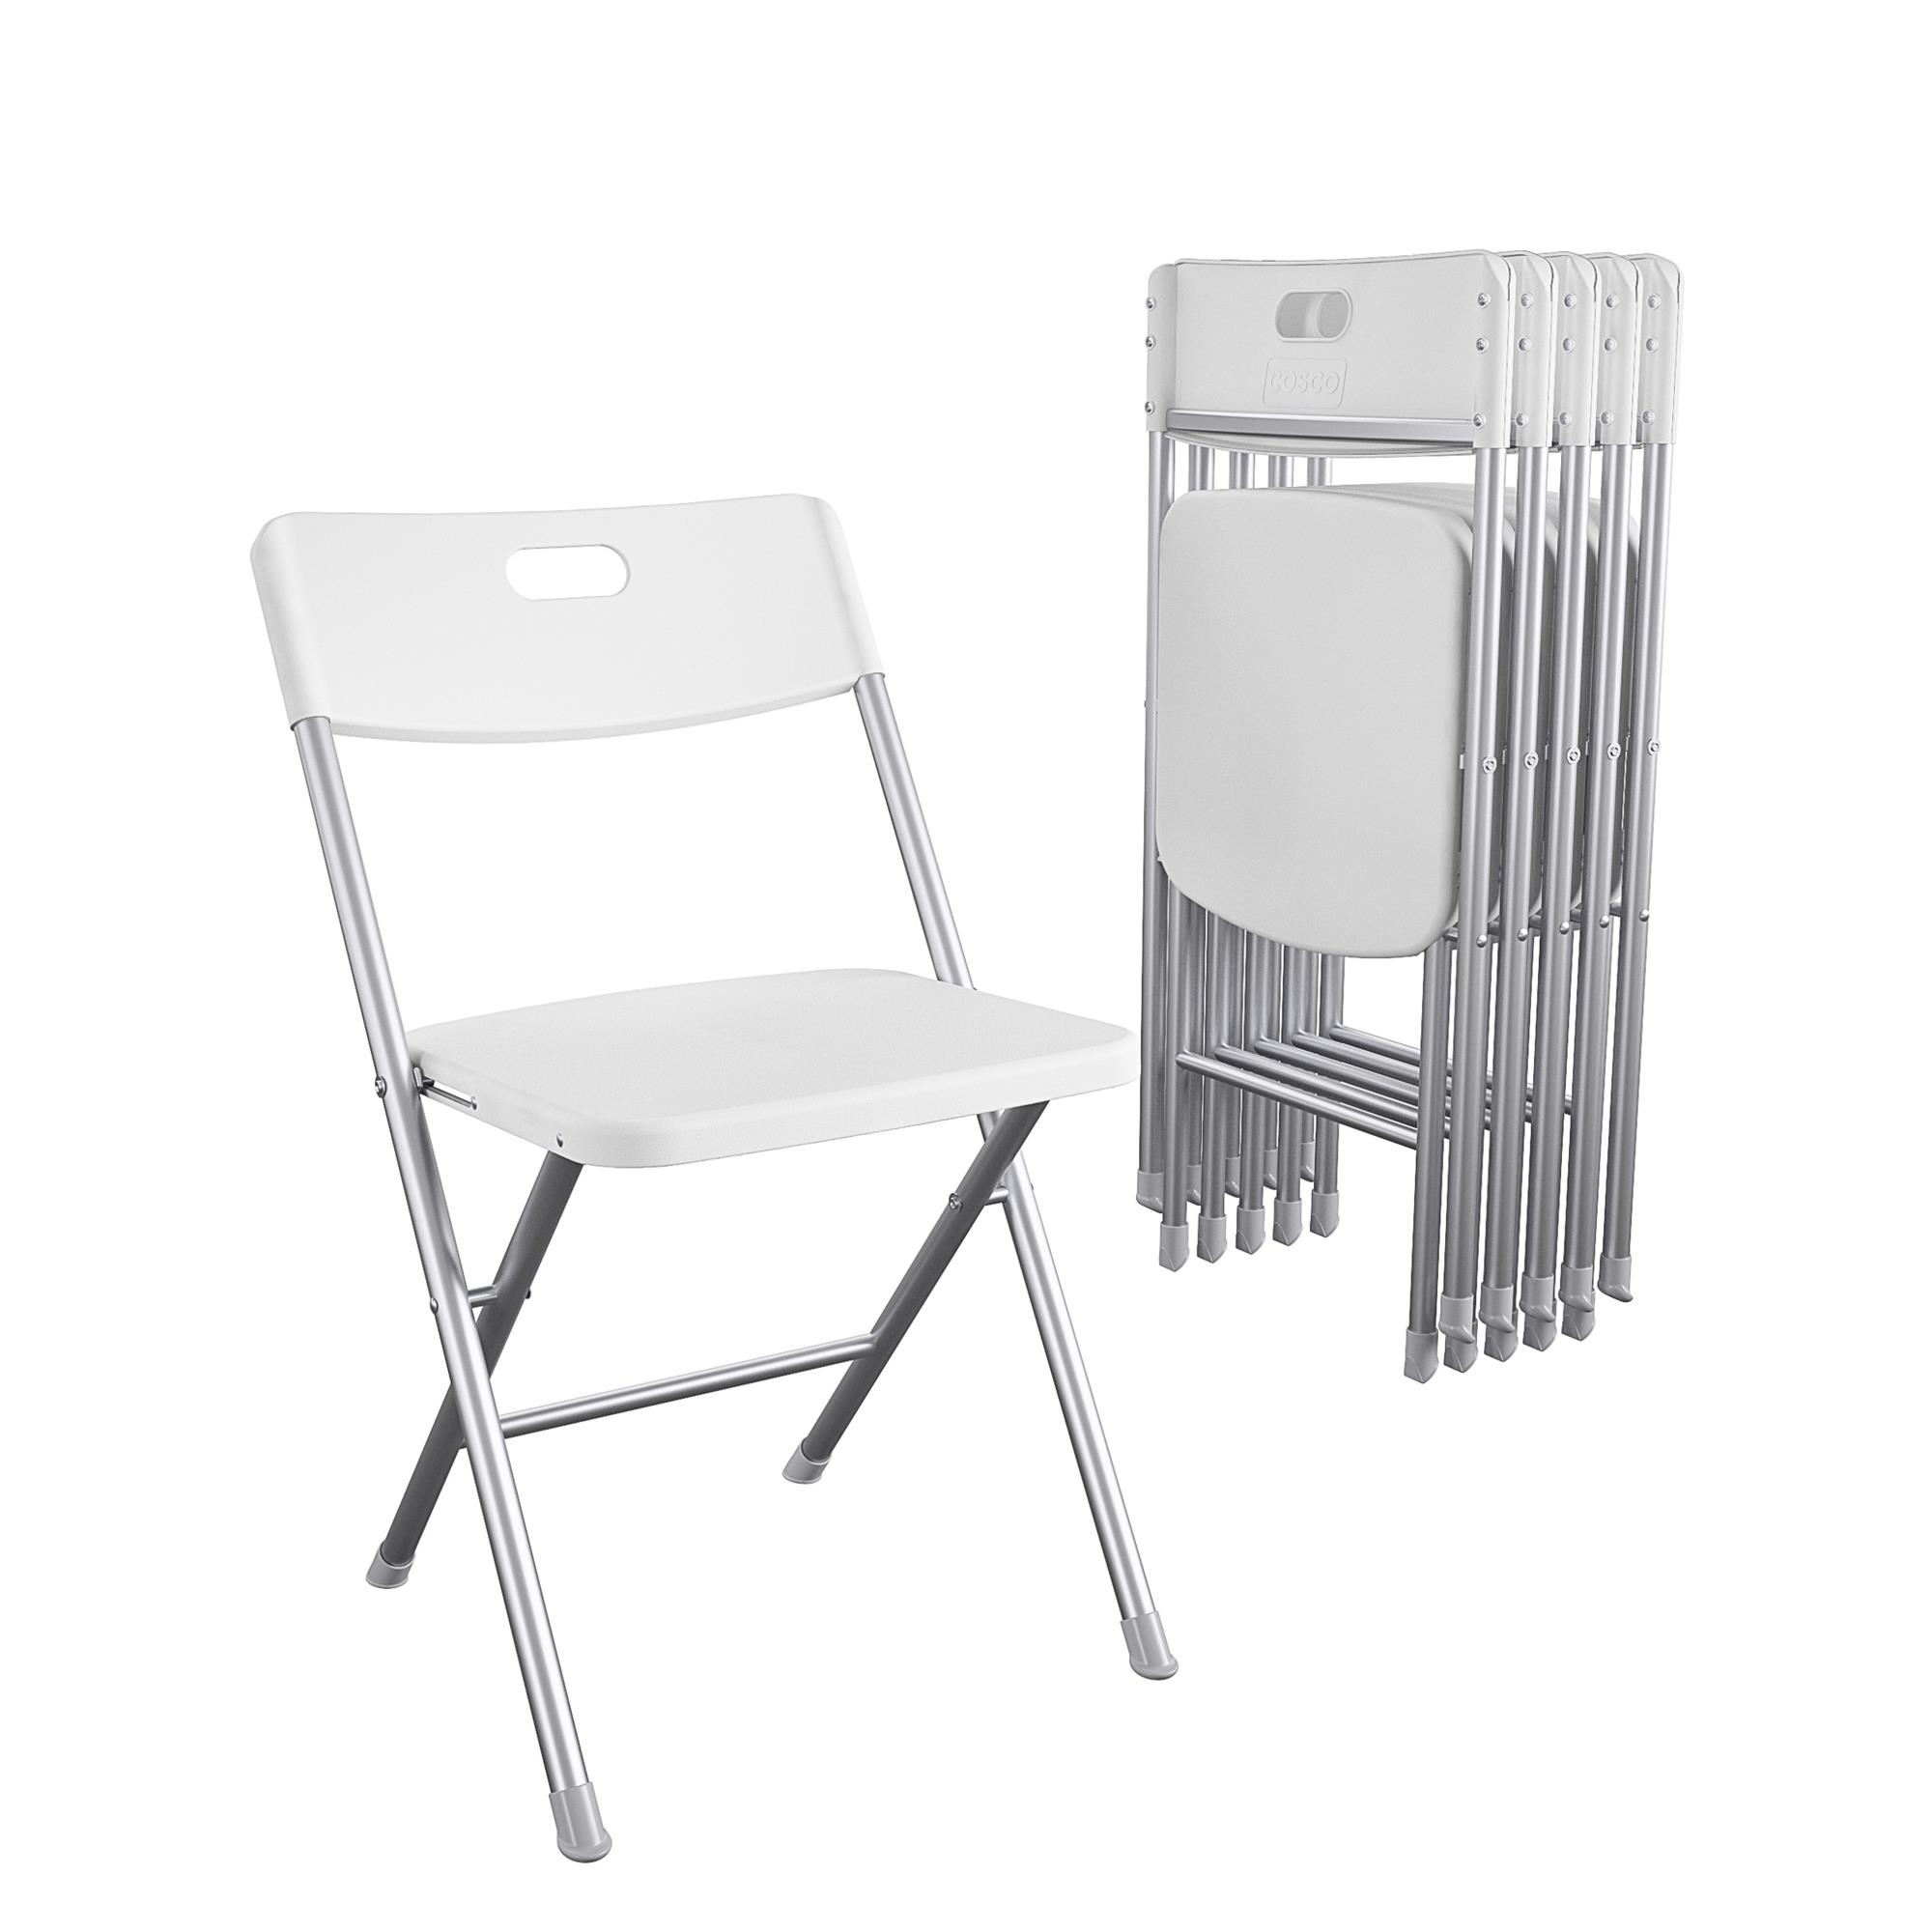 Mainstays Resin Seat & Back Folding Chair, White - image 3 of 7